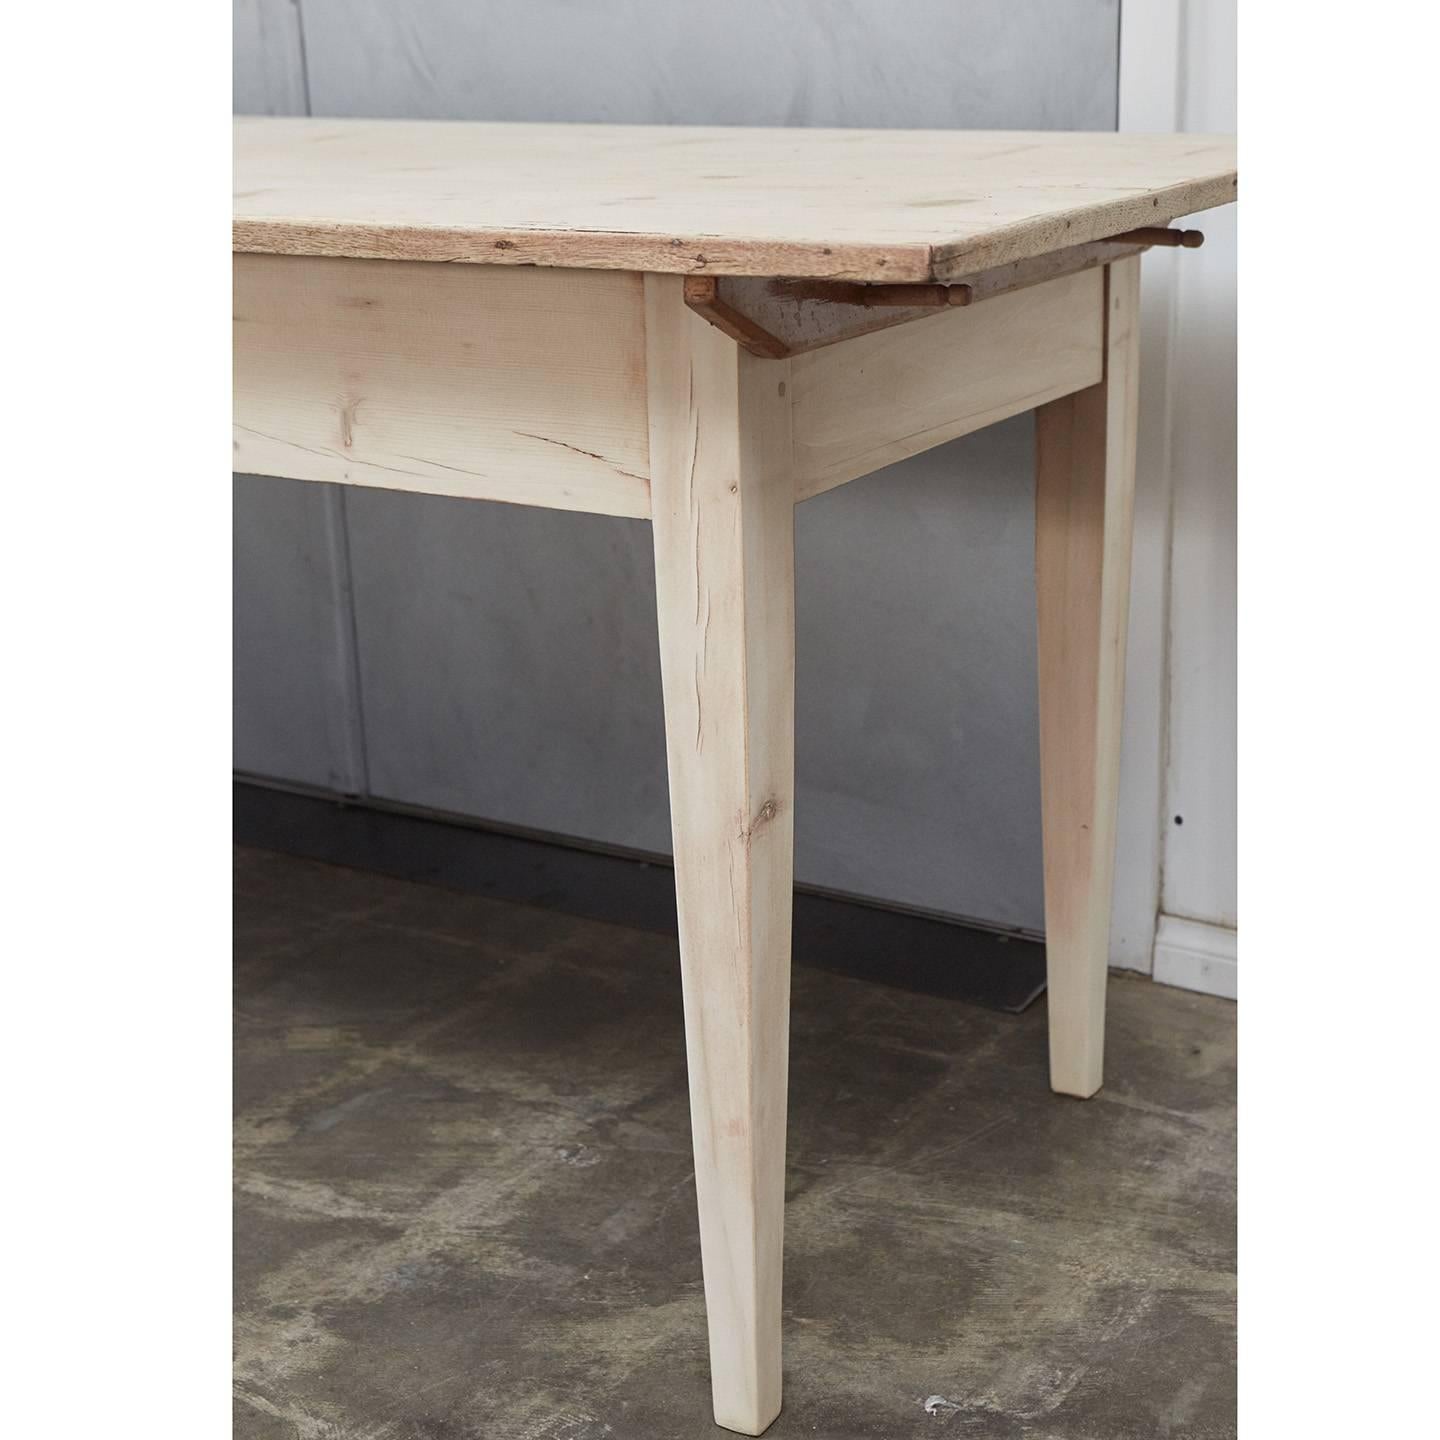 This fine country farm table with bleached wood finish is well suited for a variety of uses. Measure: The table has a three board top, 6